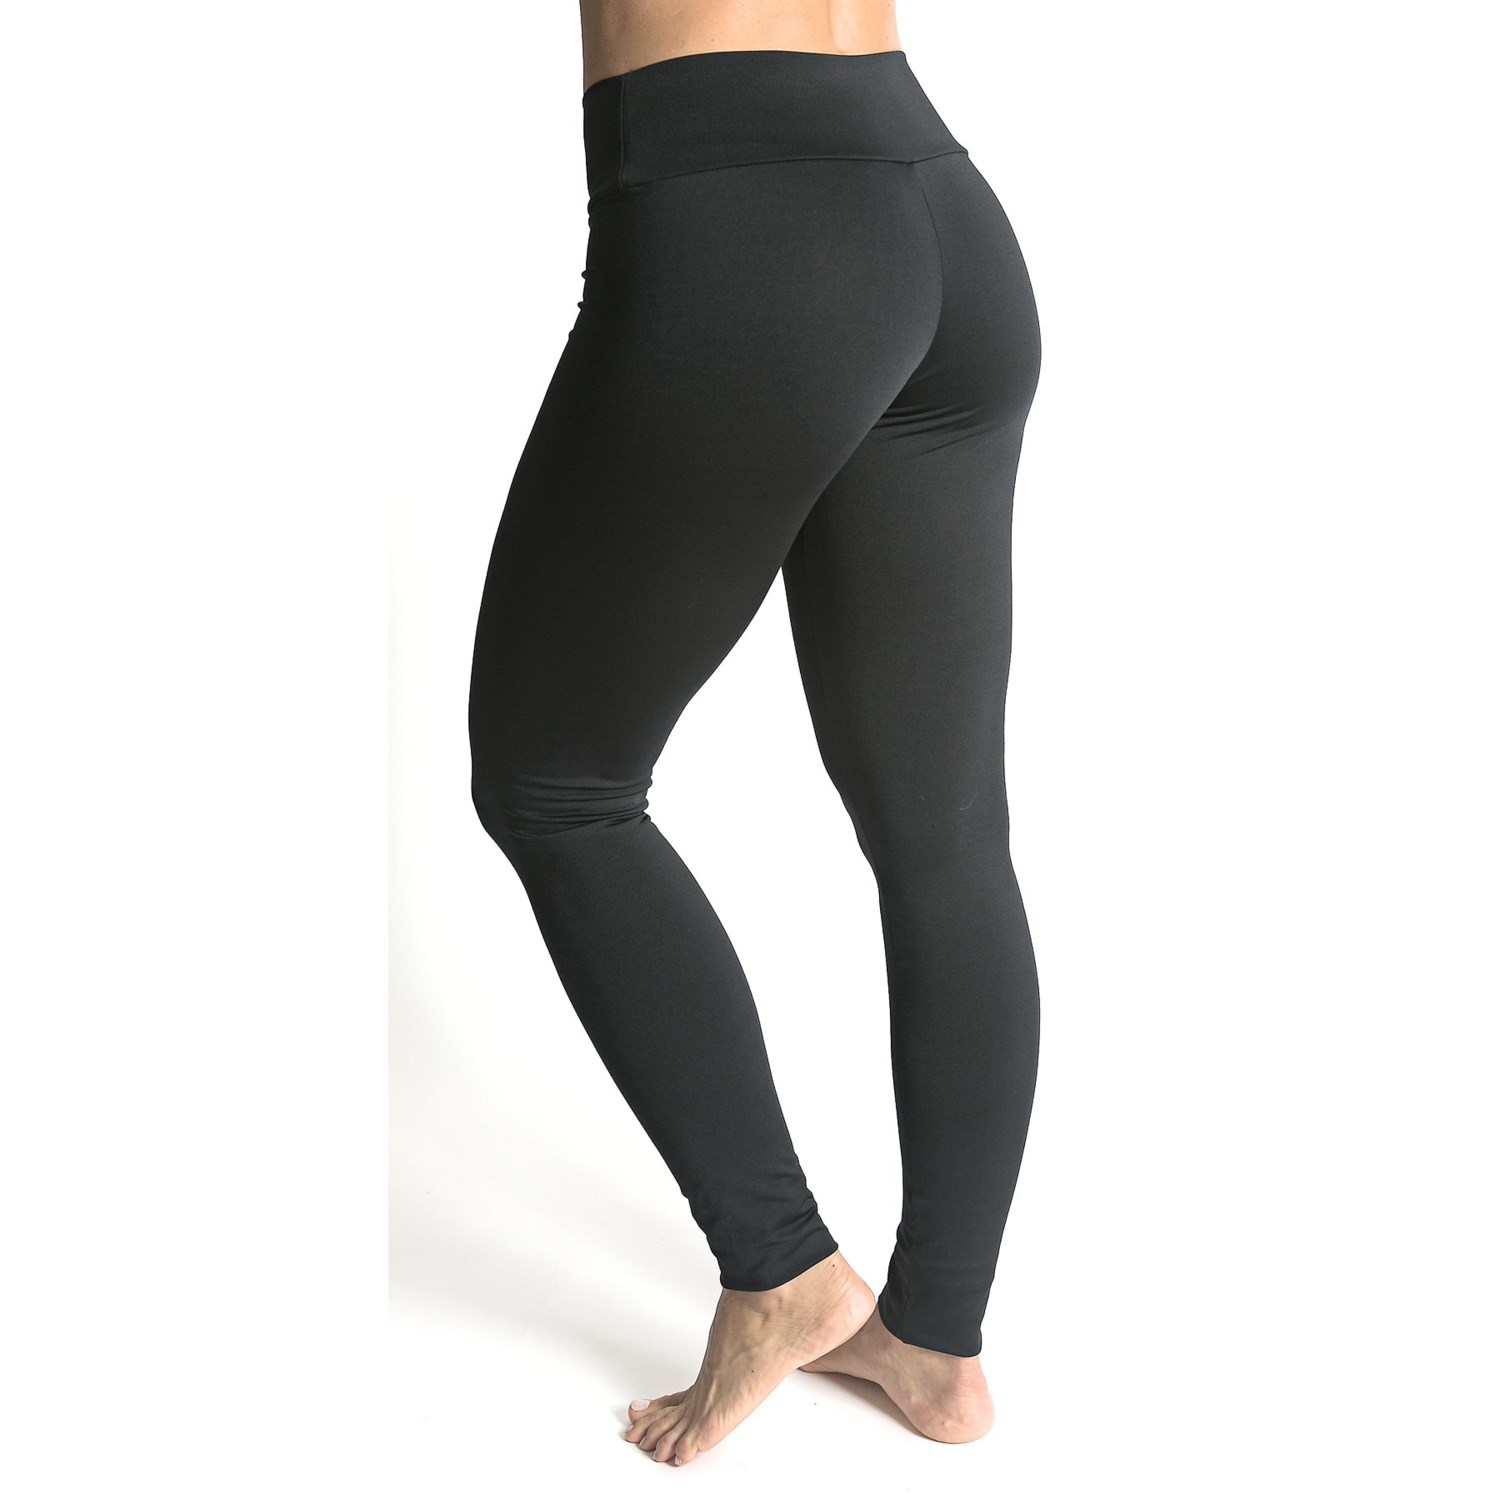 Be Up Supreme Leggings (For Women) 8354N - Save 59%